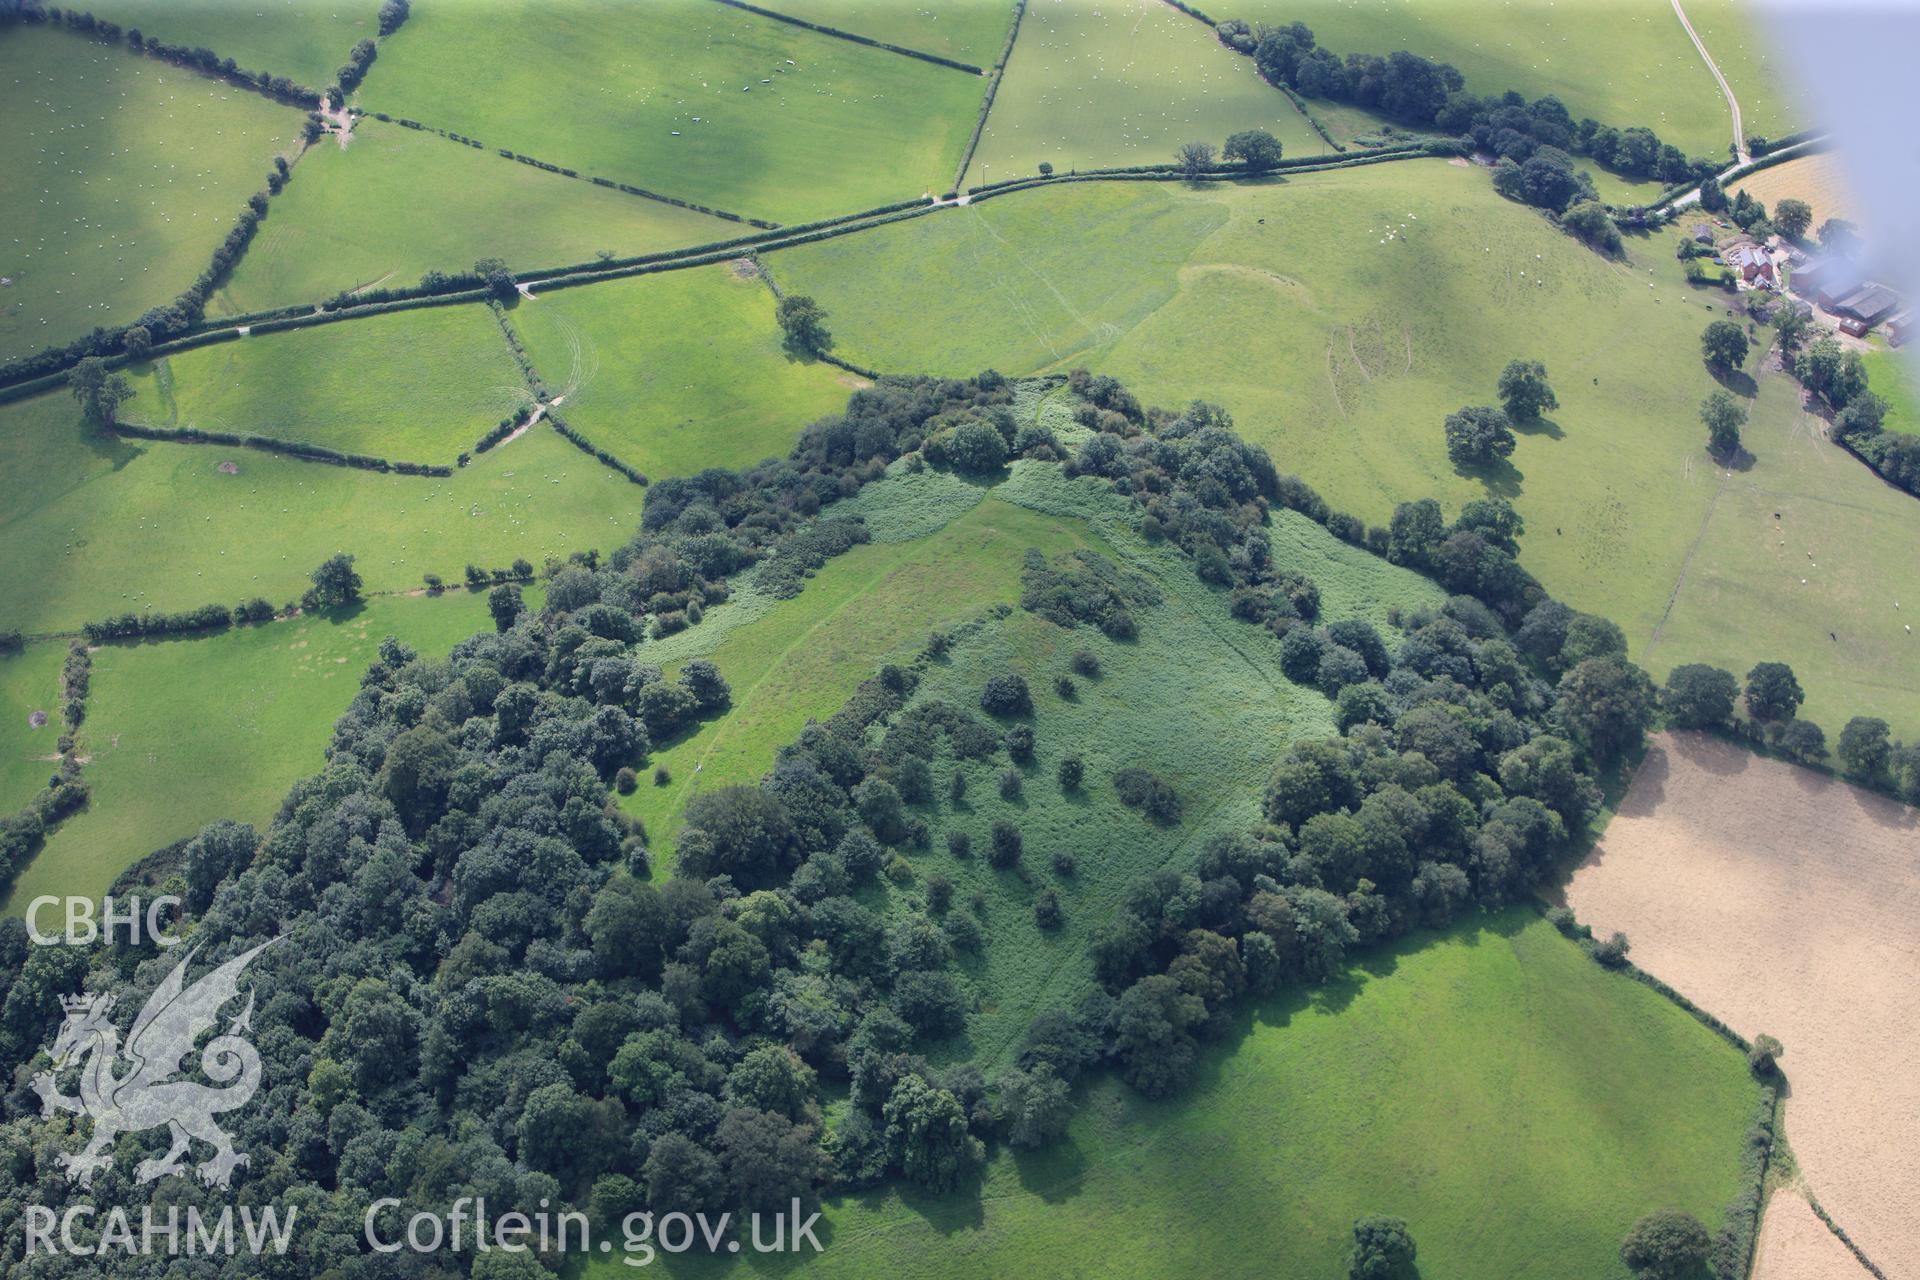 RCAHMW colour oblique photograph of Ffridd Faldwyn hillfort, Montgomery. Taken by Toby Driver on 27/07/2012.